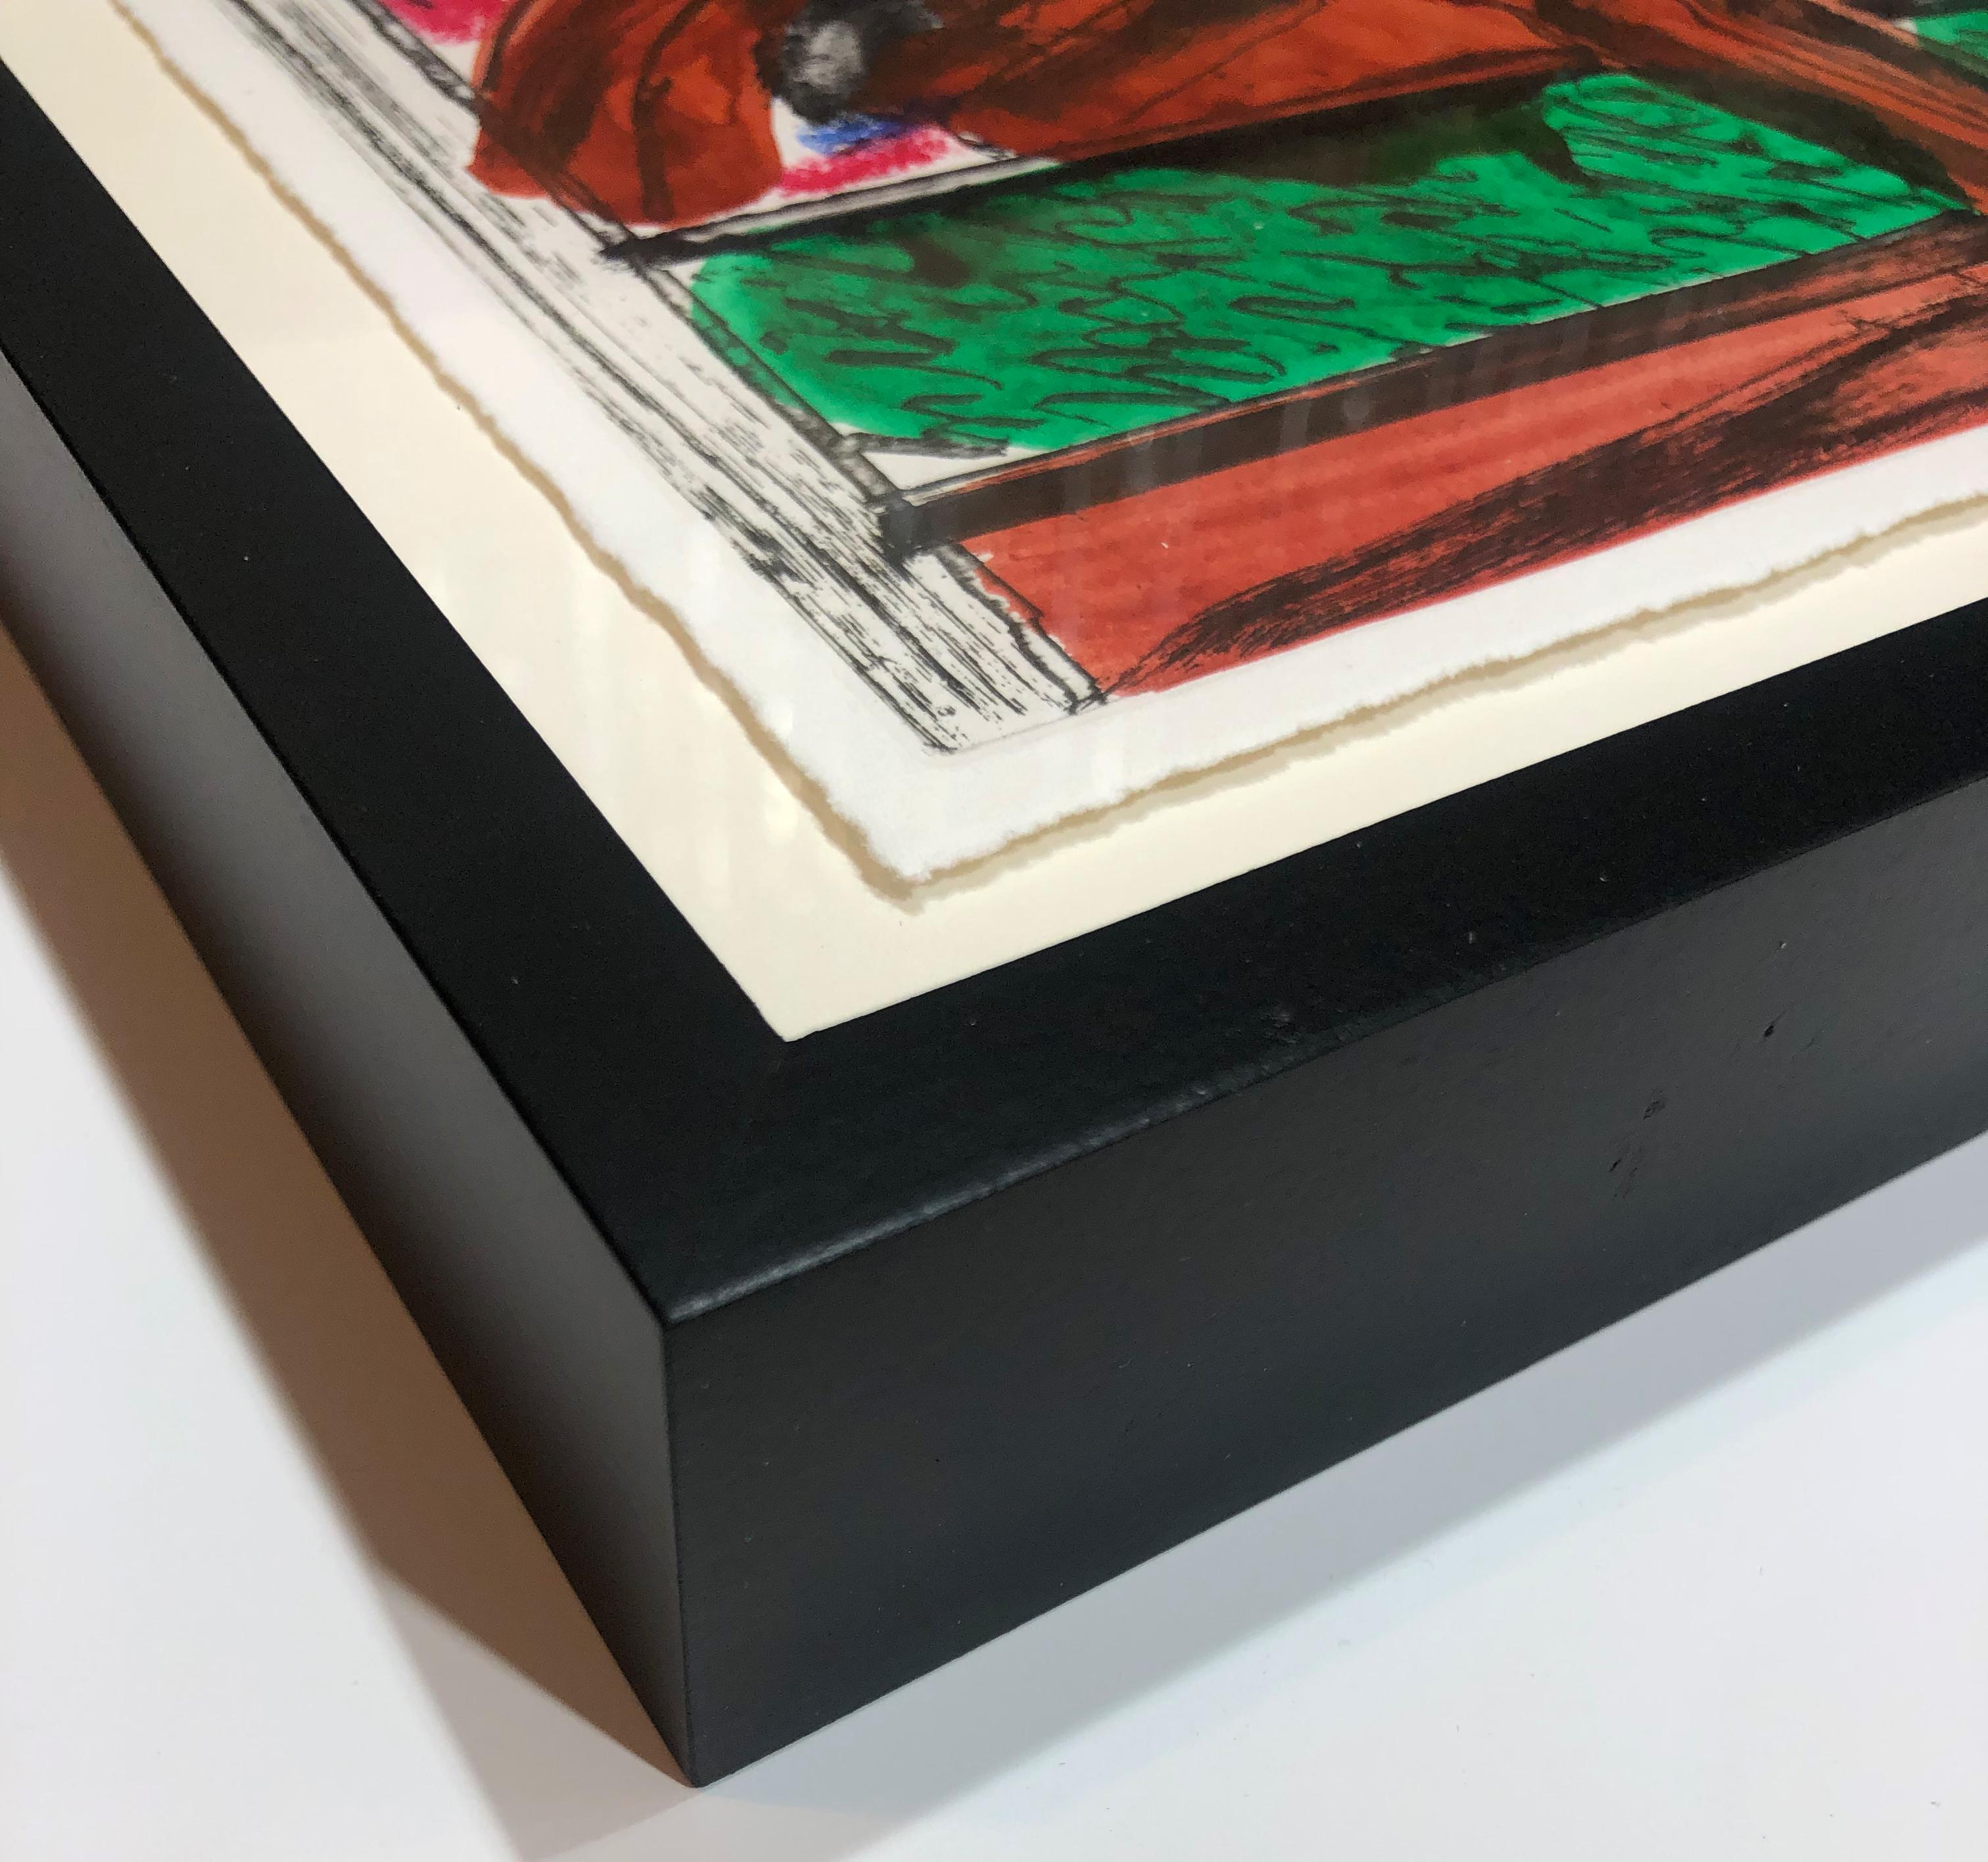 Howard Hodgkin based this print on a trip he took to visit his good friend and fellow Petersburg Press collaborator David Hockney in Los Angeles. The mid-eighties saw new levels of abstraction in Hodgkin’s work, building exuberantly off the